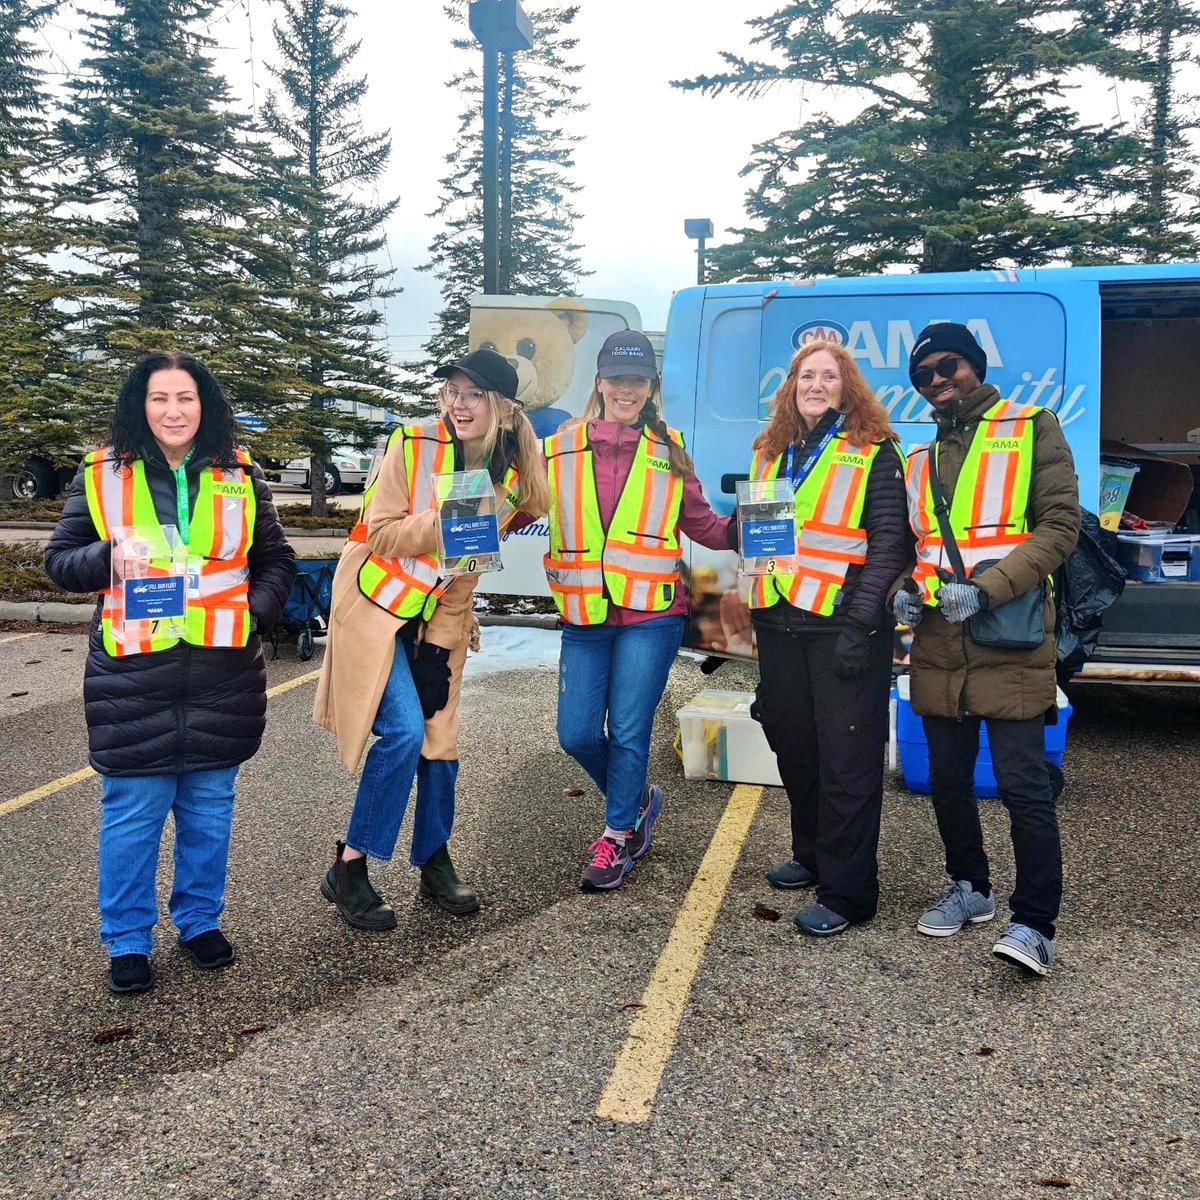 Shredding for a Cause ♻️ Over the weekend @AMAcommunity teamed up with Calgary Food Bank for their annual shredding event, tackling hunger one document at a time. A big thank you to our volunteers for pitching in and helping out!